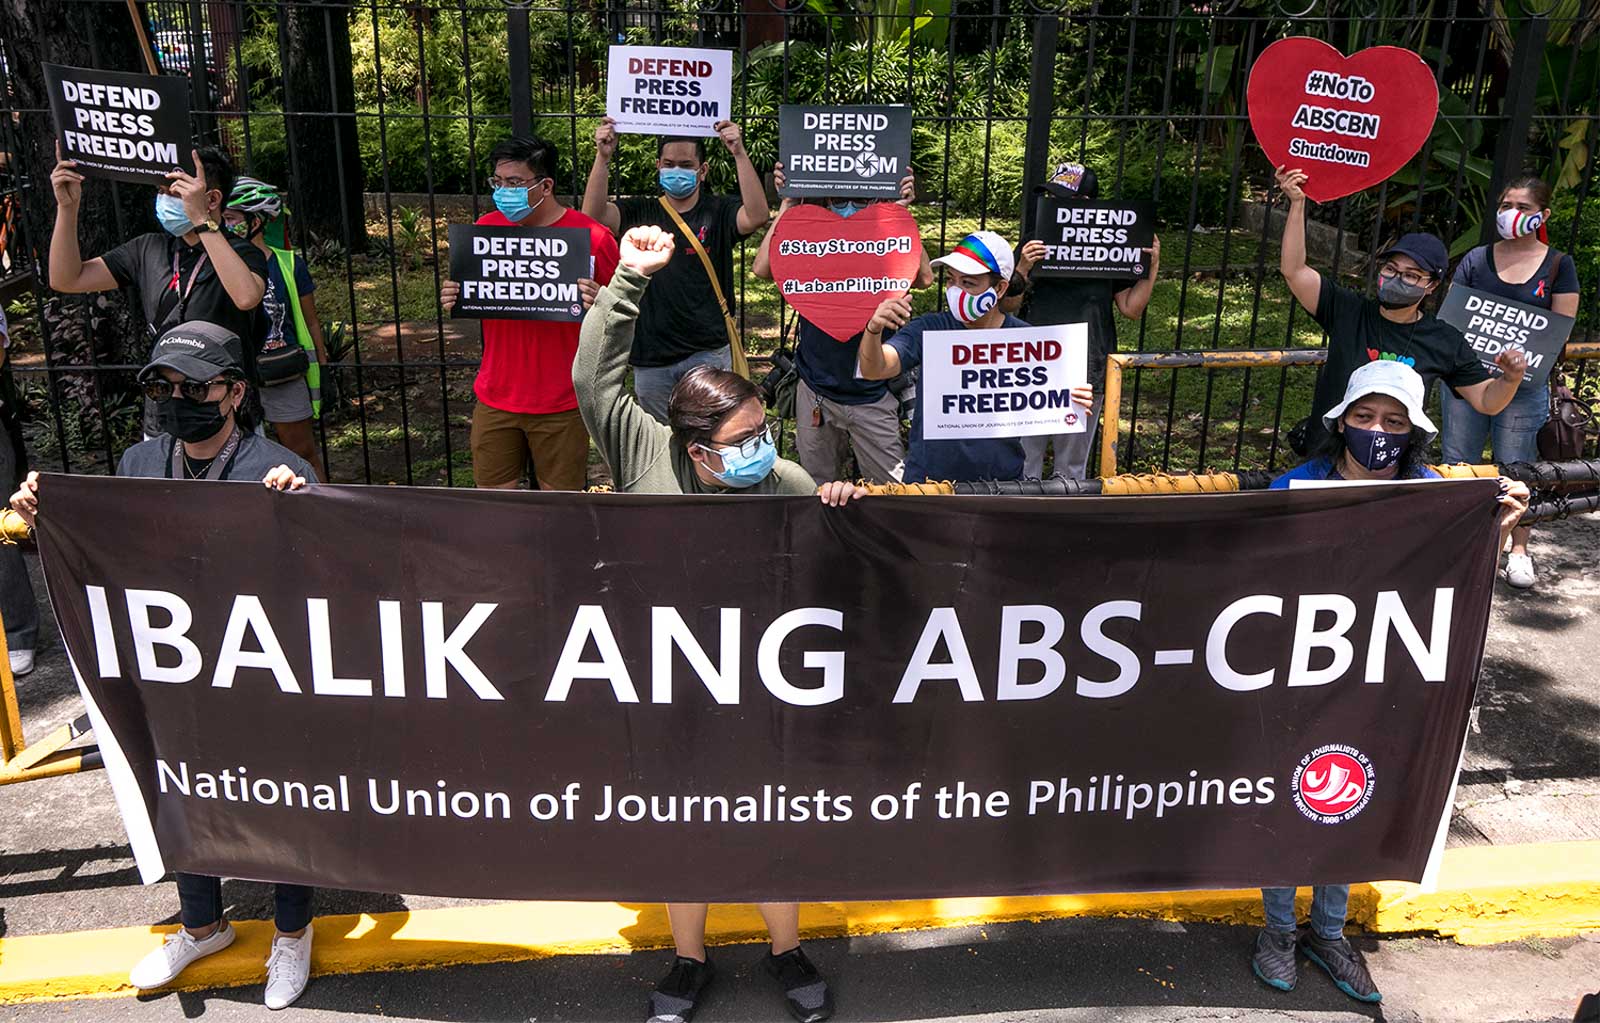 BATTLE FOR PRESS FREEDOM. The National Union of Journalists of the Philippines protests against the shutdown of ABS-CBN. Photo by Darren Langit/Rappler 